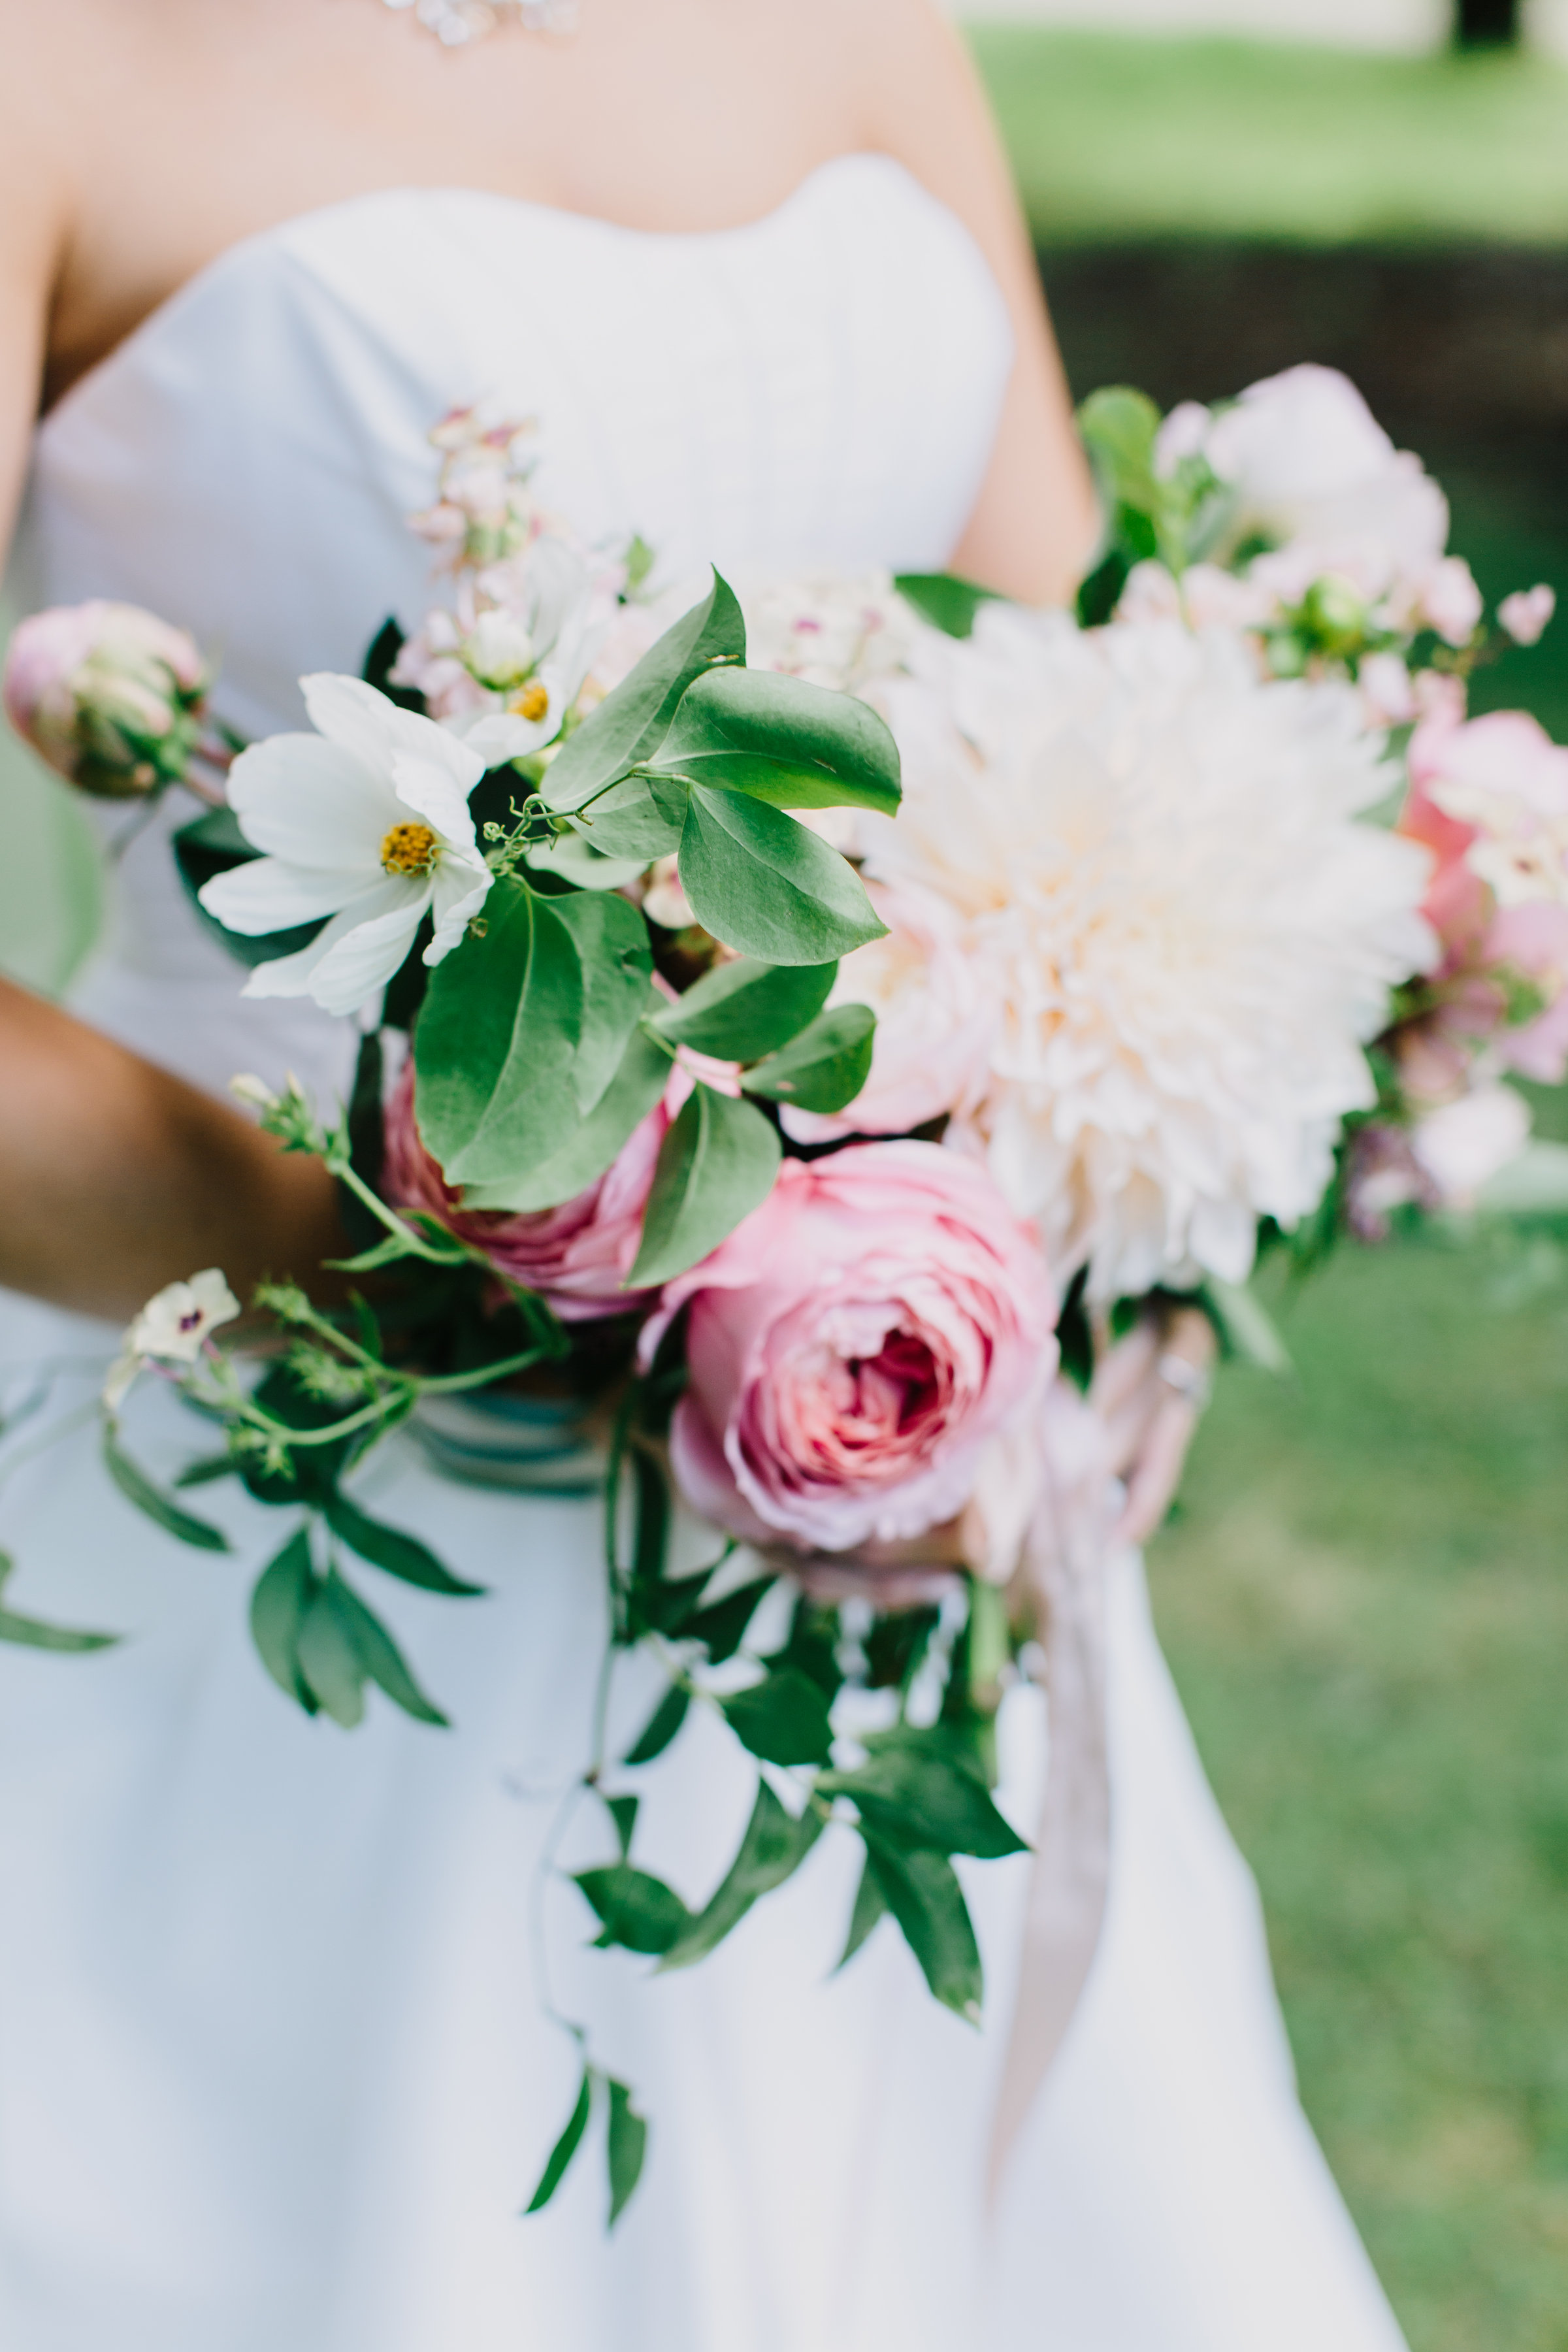 Pink Bridal Bouquet | The Day's Design | Katie Grace Photography